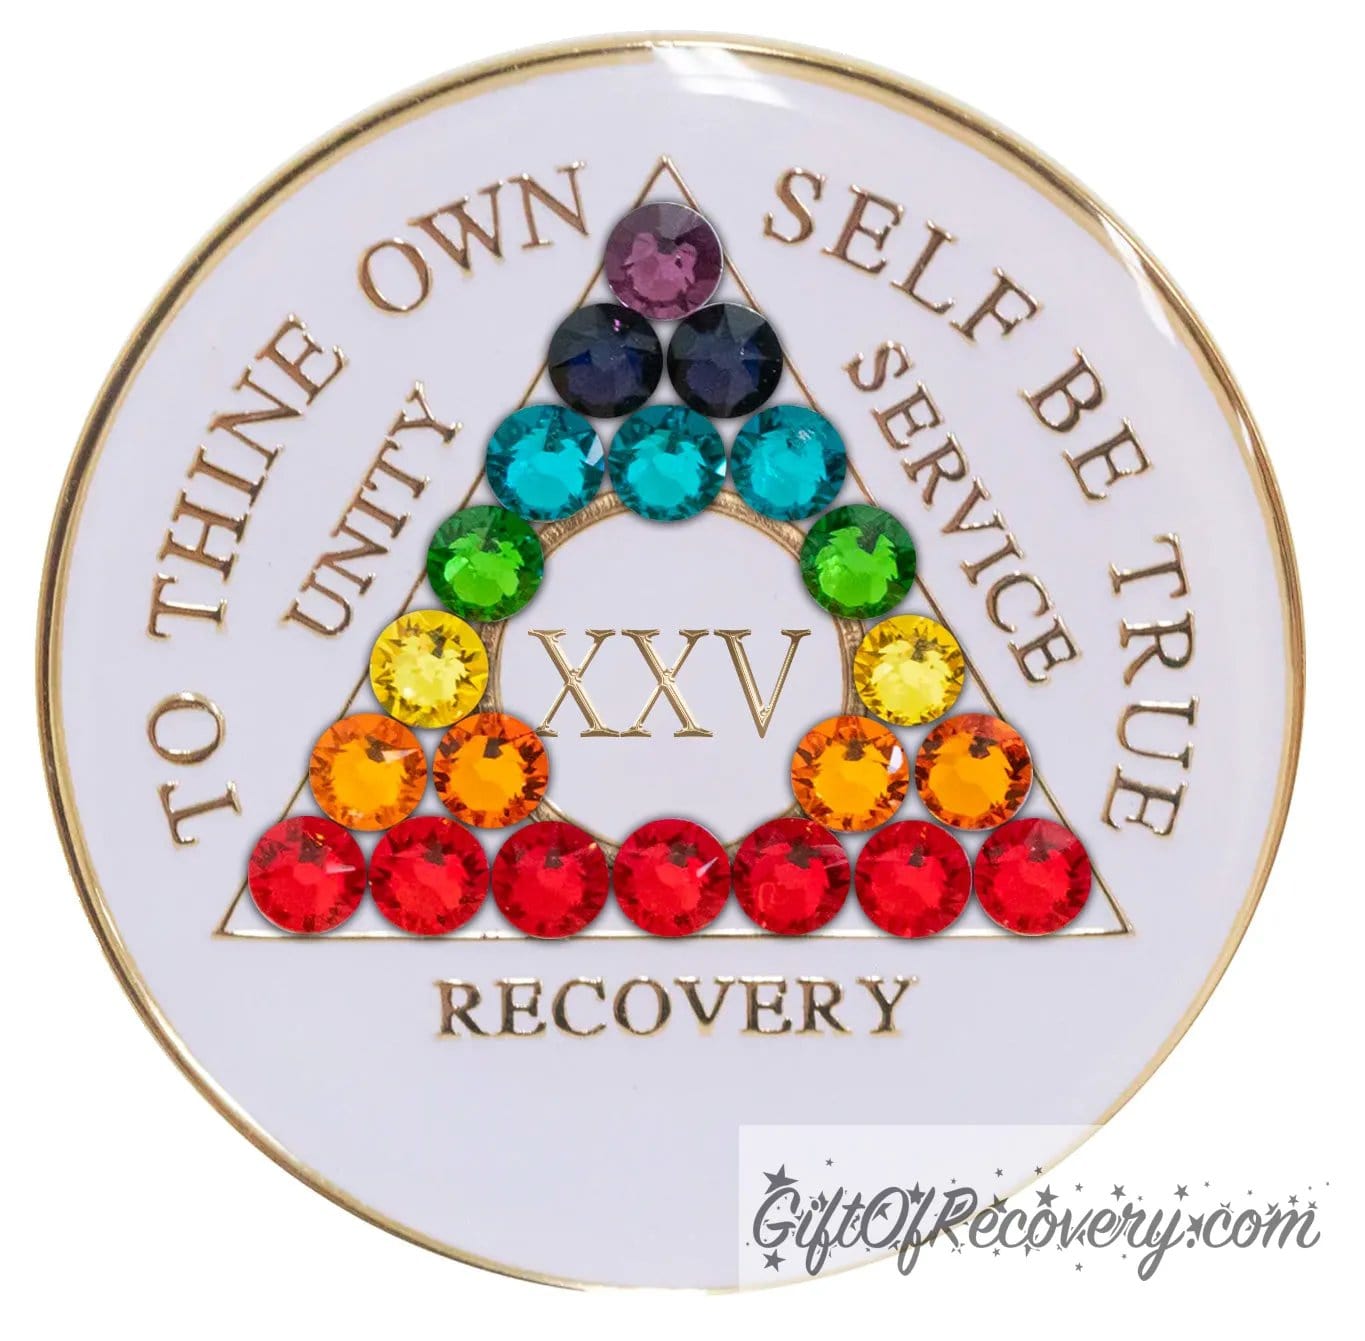 Sobriety Chip AA Chakra Bling Crystallized White Triplate 25 Years